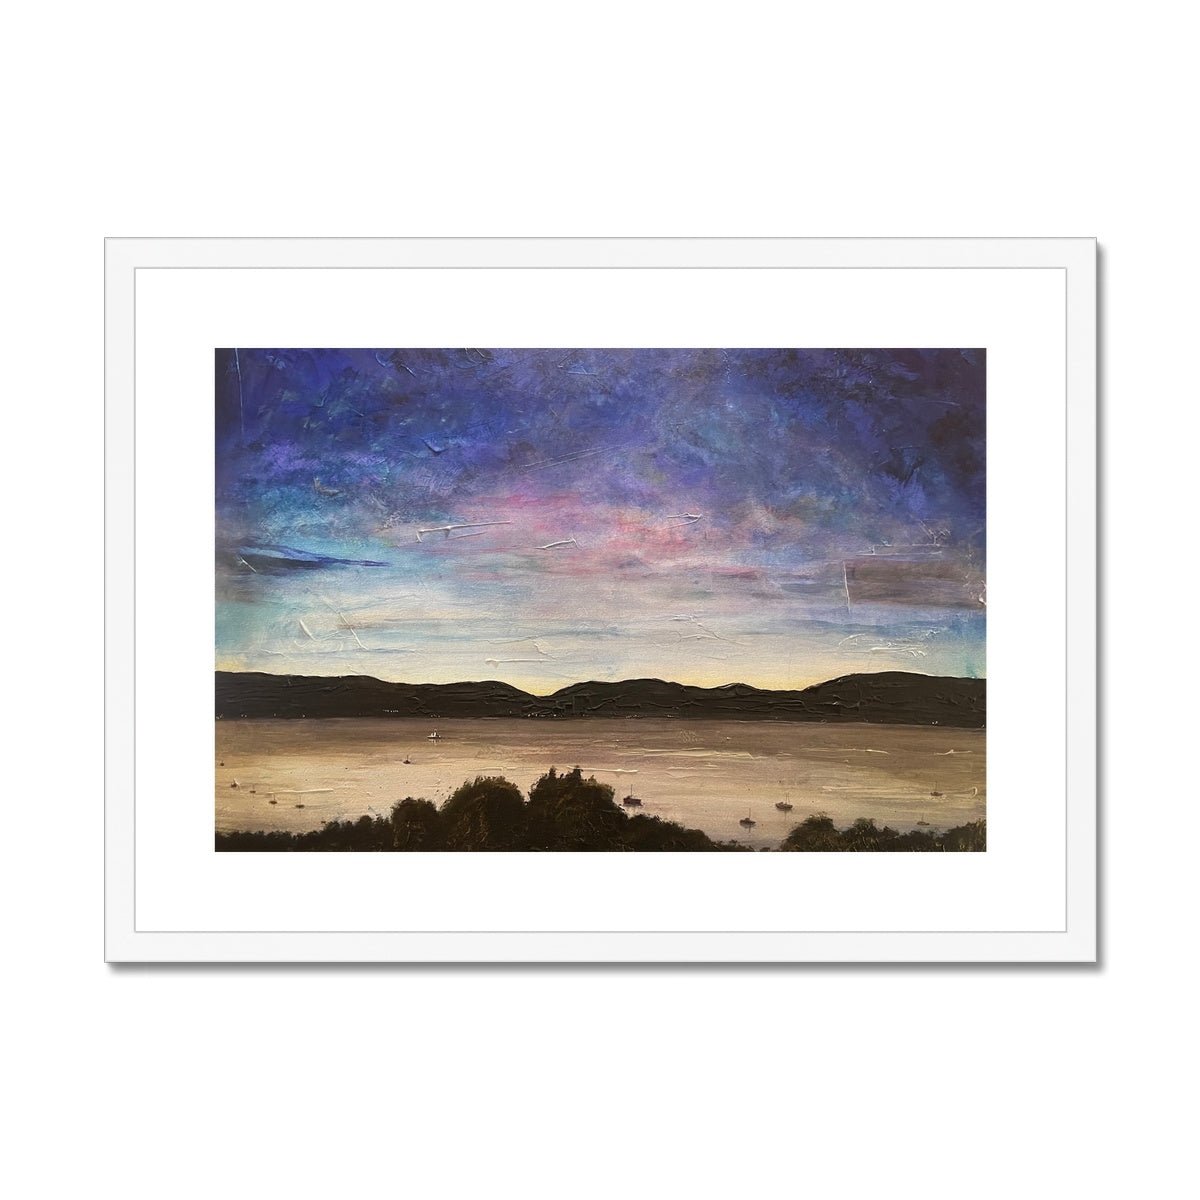 River Clyde Twilight Painting | Framed & Mounted Prints From Scotland-Framed & Mounted Prints-River Clyde Art Gallery-A2 Landscape-White Frame-Paintings, Prints, Homeware, Art Gifts From Scotland By Scottish Artist Kevin Hunter